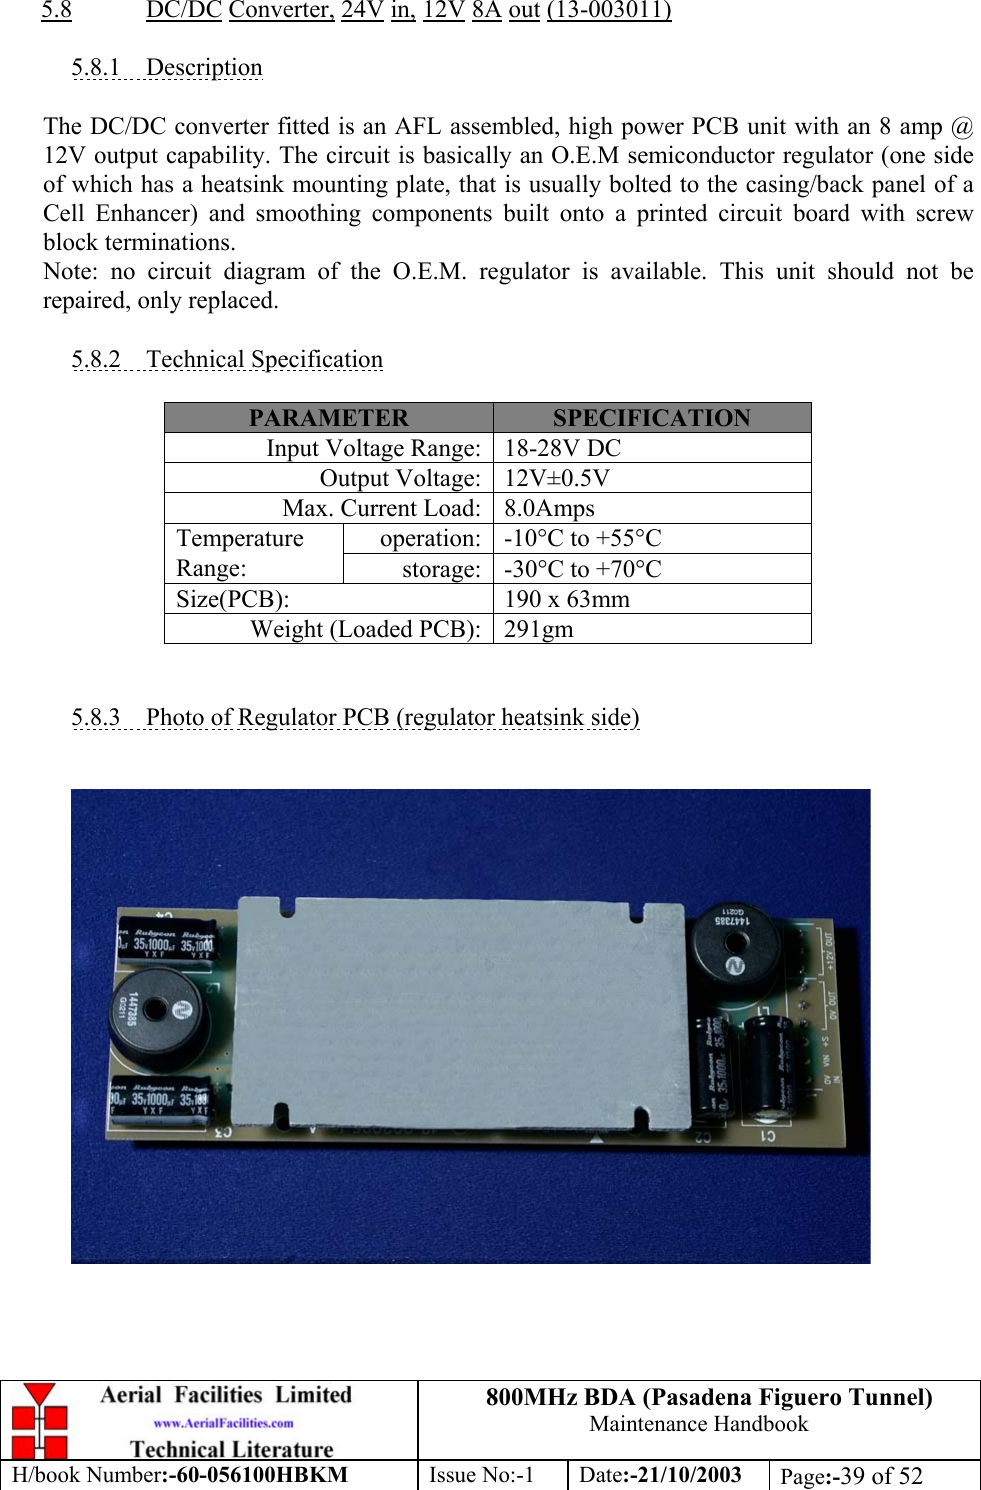 800MHz BDA (Pasadena Figuero Tunnel)Maintenance HandbookH/book Number:-60-056100HBKM Issue No:-1 Date:-21/10/2003 Page:-39 of 525.8 DC/DC Converter, 24V in, 12V 8A out (13-003011)5.8.1    DescriptionThe DC/DC converter fitted is an AFL assembled, high power PCB unit with an 8 amp @12V output capability. The circuit is basically an O.E.M semiconductor regulator (one sideof which has a heatsink mounting plate, that is usually bolted to the casing/back panel of aCell Enhancer) and smoothing components built onto a printed circuit board with screwblock terminations.Note: no circuit diagram of the O.E.M. regulator is available. This unit should not berepaired, only replaced.5.8.2    Technical SpecificationPARAMETER SPECIFICATIONInput Voltage Range: 18-28V DCOutput Voltage: 12V±0.5VMax. Current Load: 8.0Ampsoperation: -10°C to +55°CTemperatureRange: storage: -30°C to +70°CSize(PCB): 190 x 63mmWeight (Loaded PCB): 291gm5.8.3    Photo of Regulator PCB (regulator heatsink side)